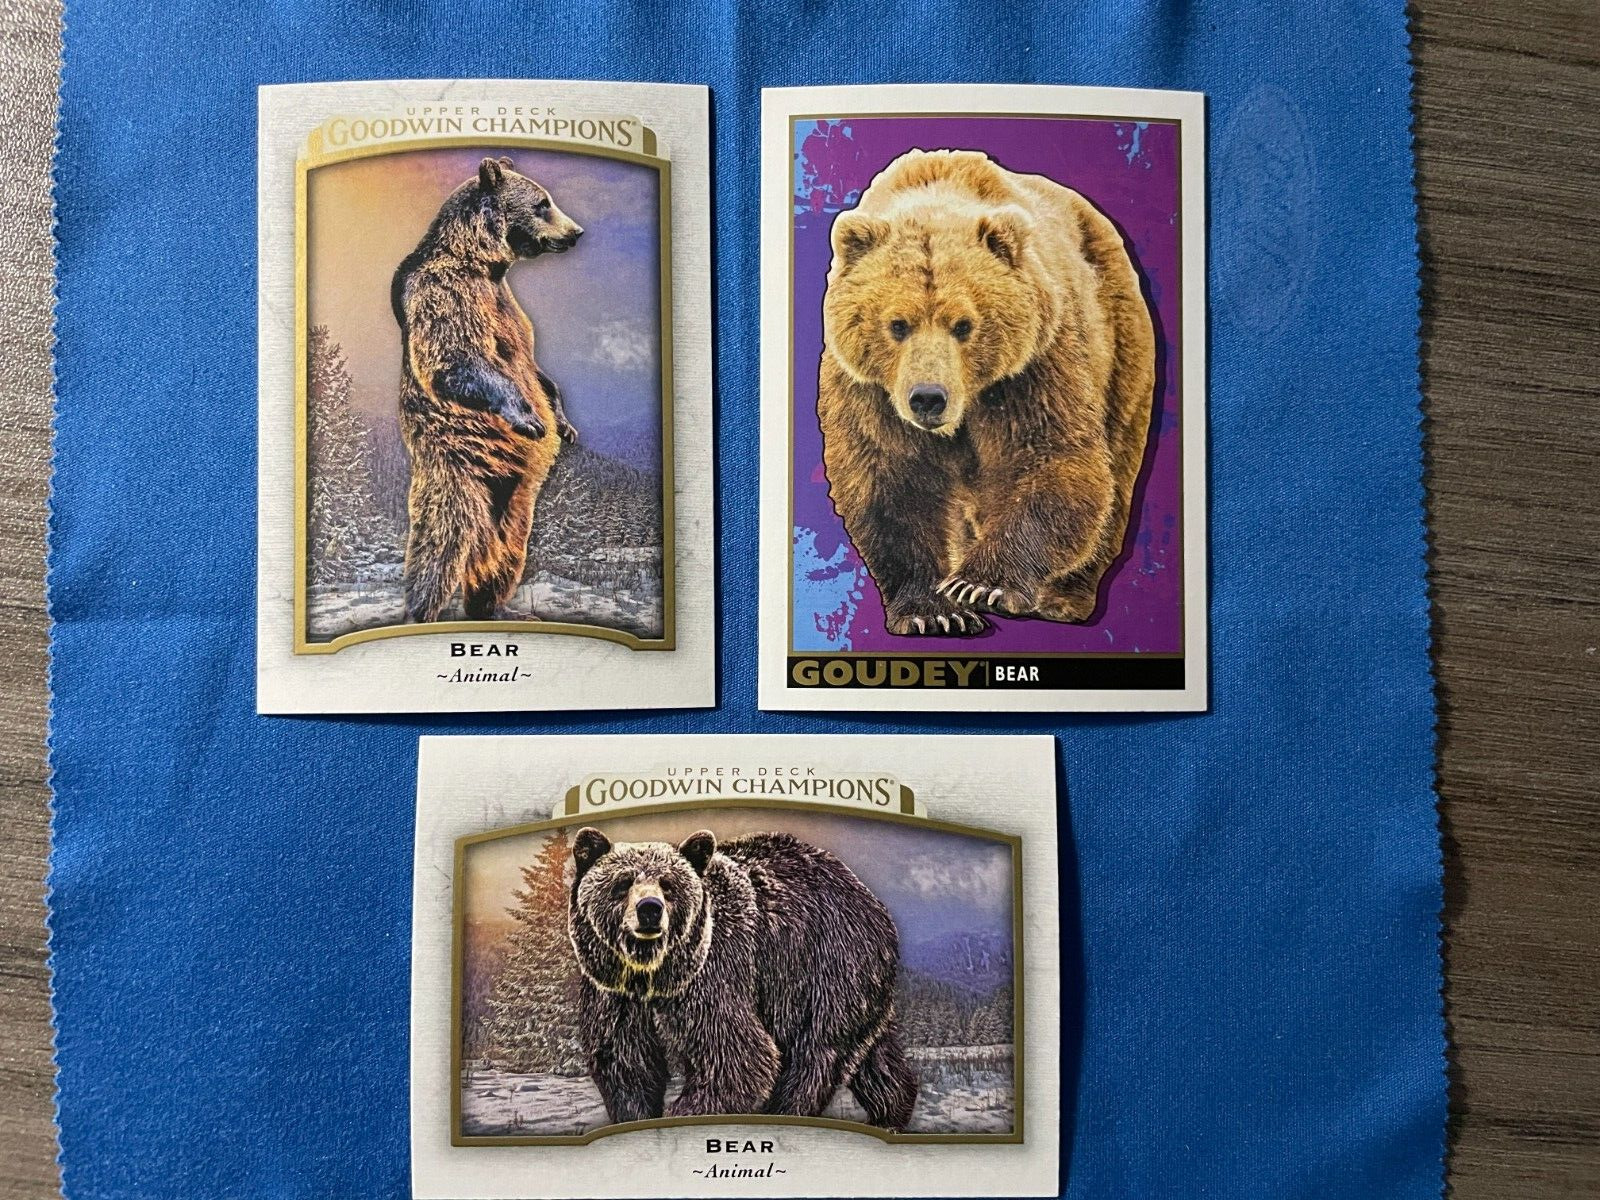 2017 Upper deck Goodwin Champions - Bear included Goudey.